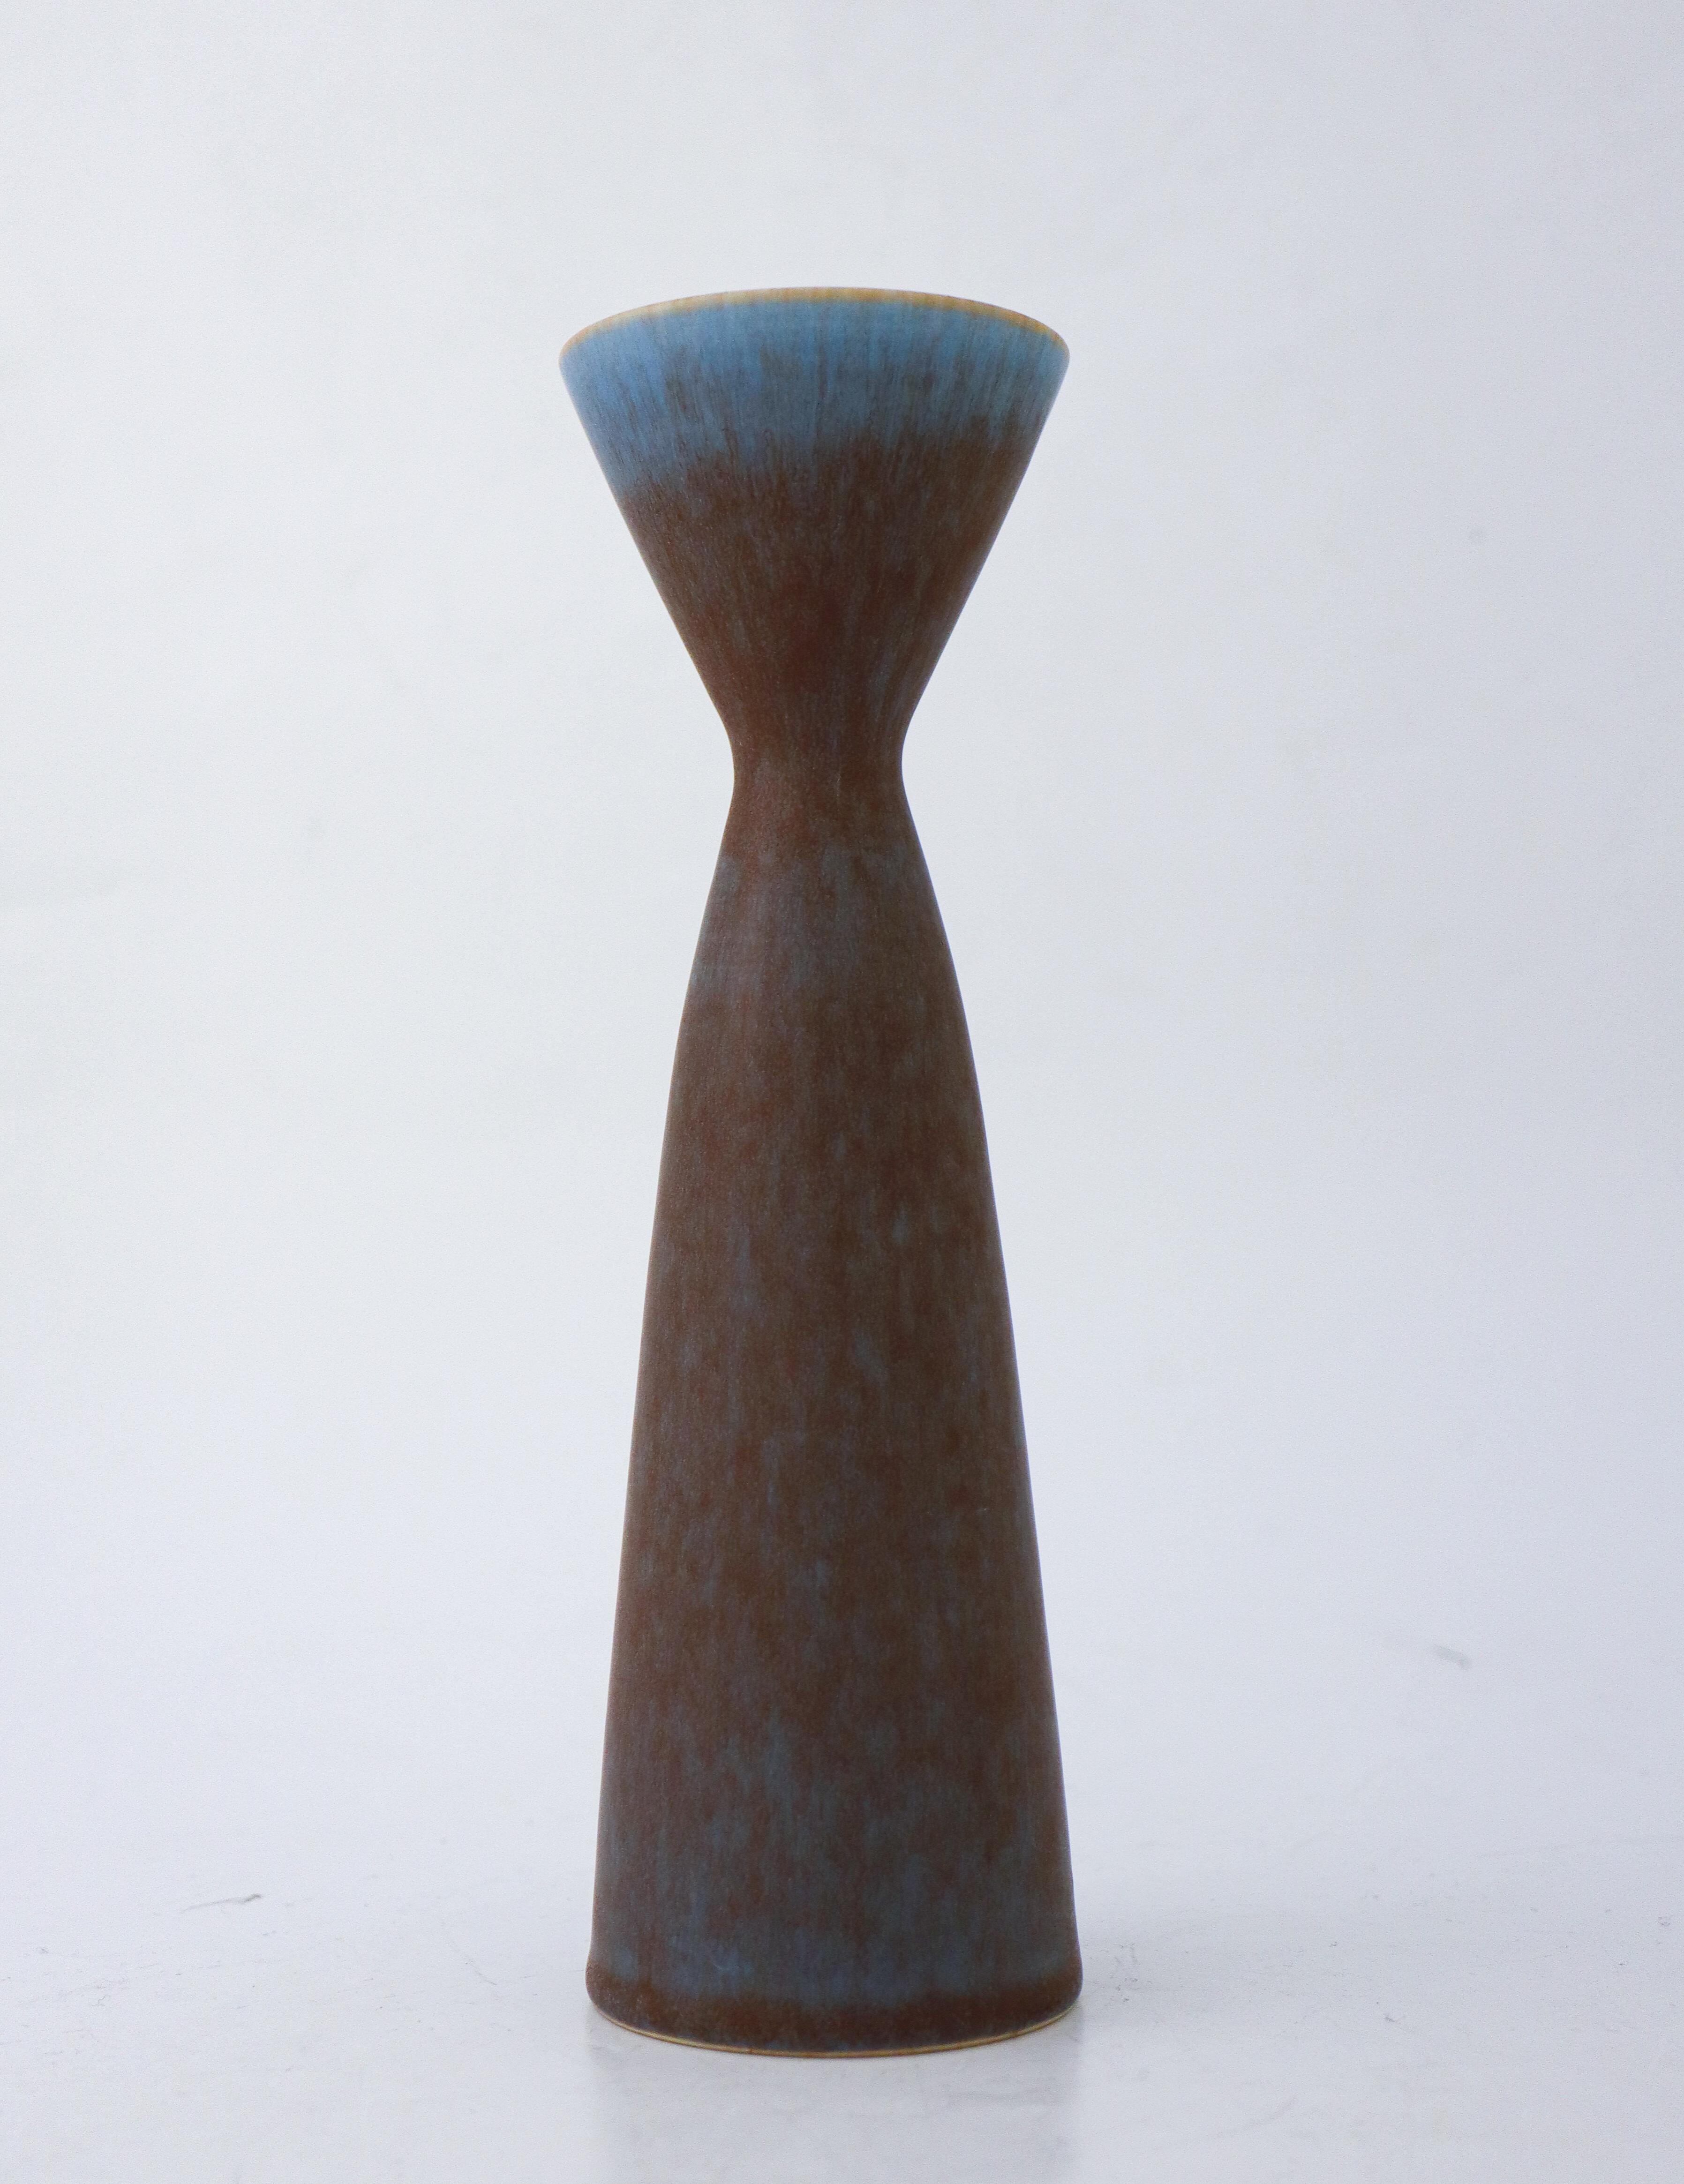 A brown and blue vase designed by Carl-Harry Stålhane at Rörstrand Atelier, it´s 23 cm (9.2